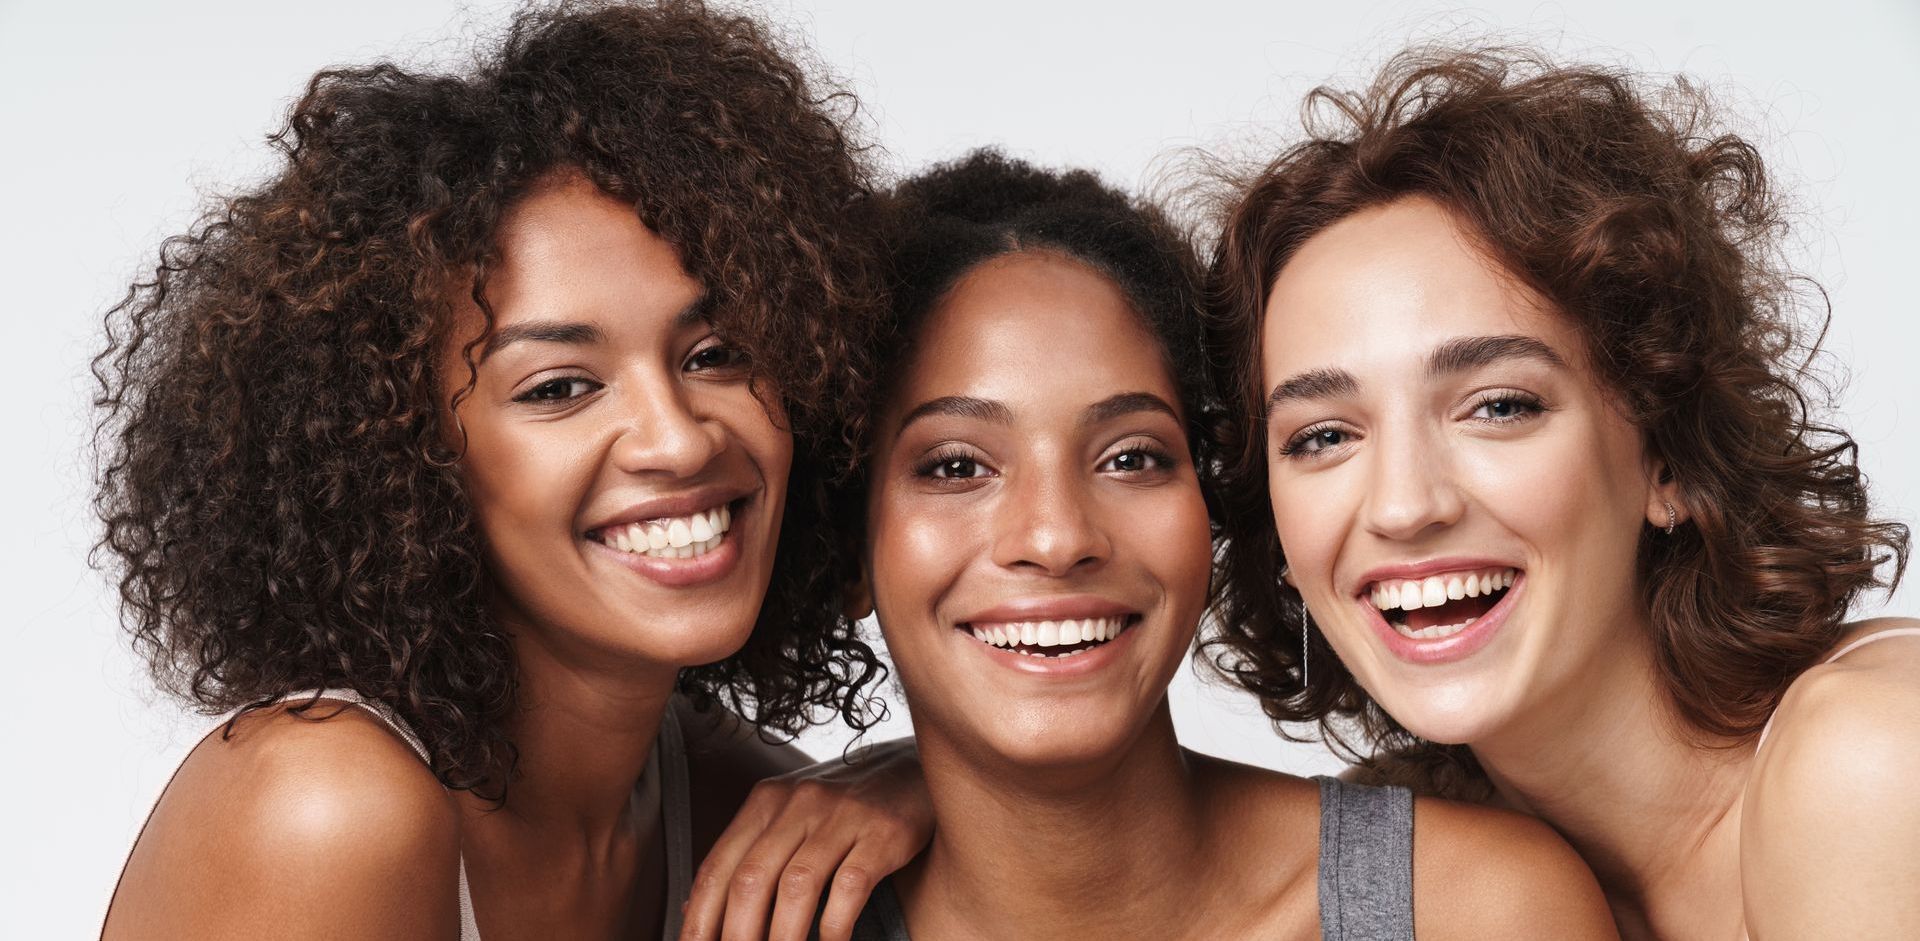 Three women are posing for a picture. Refresh your look with facial aesthetic services. Choose from our selection of treatments like Botox, facial fillers, thread lifts.